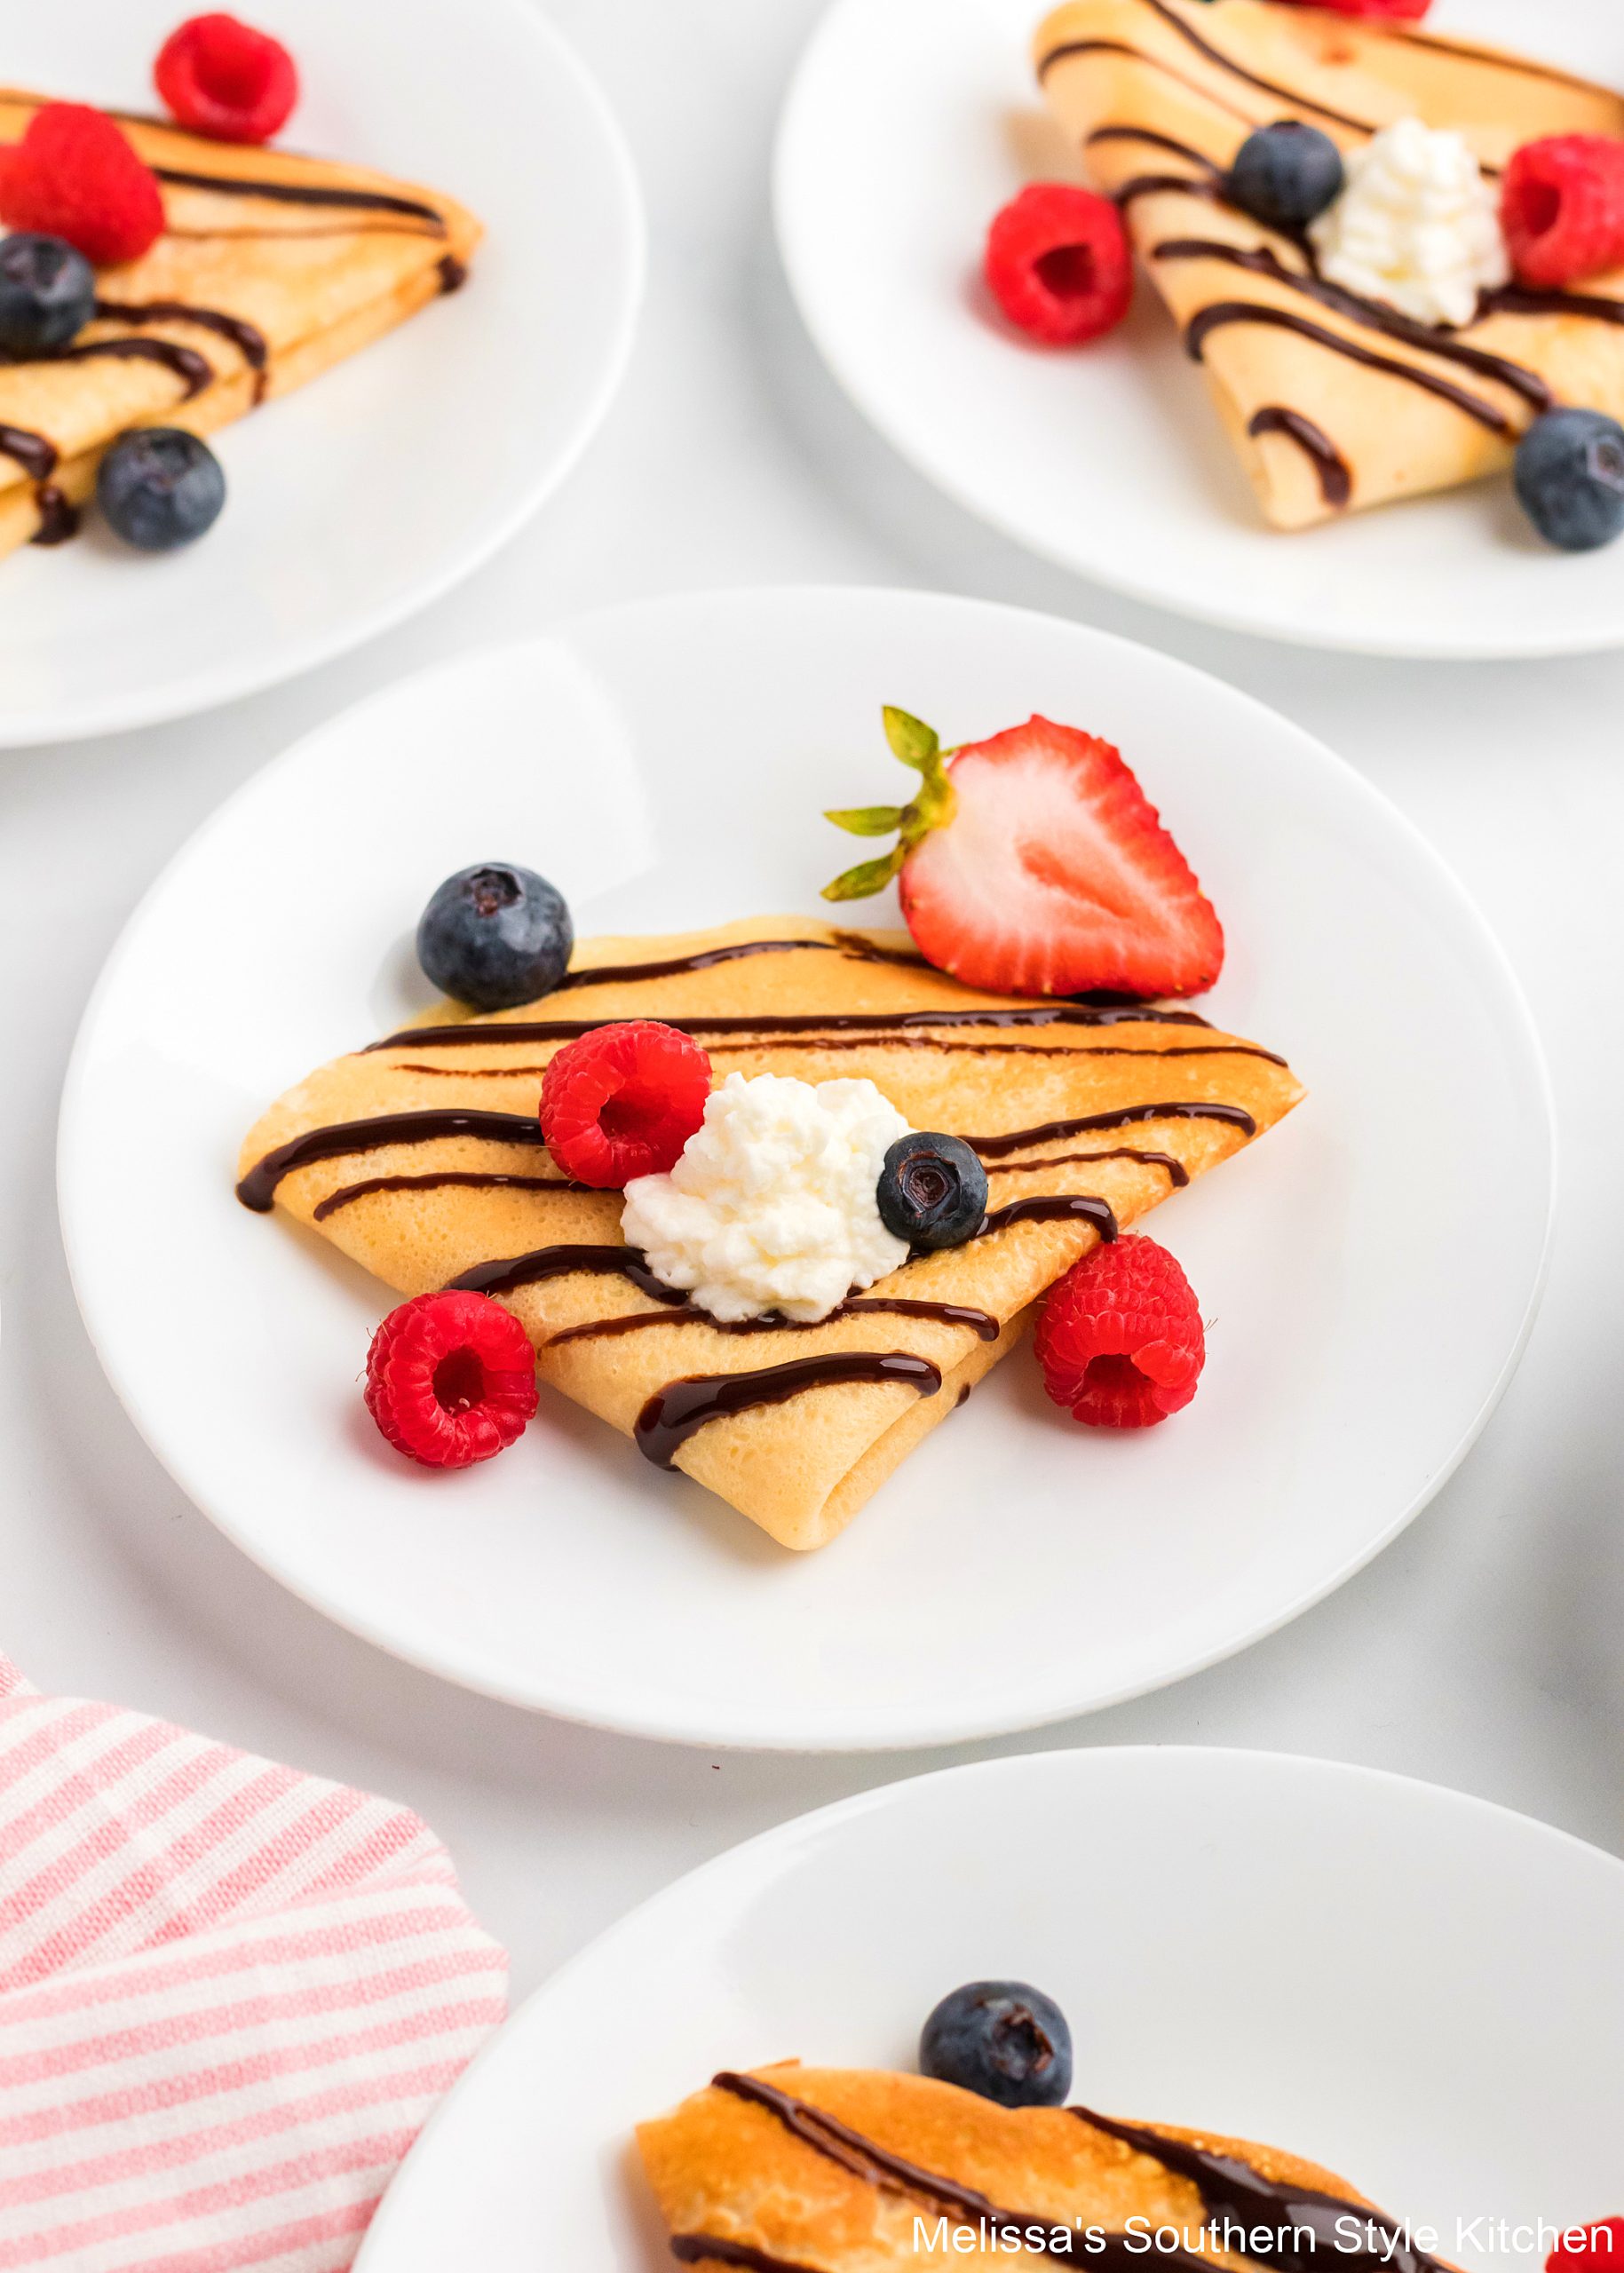 Nutella Crepes Recipe - Home. Made. Interest.